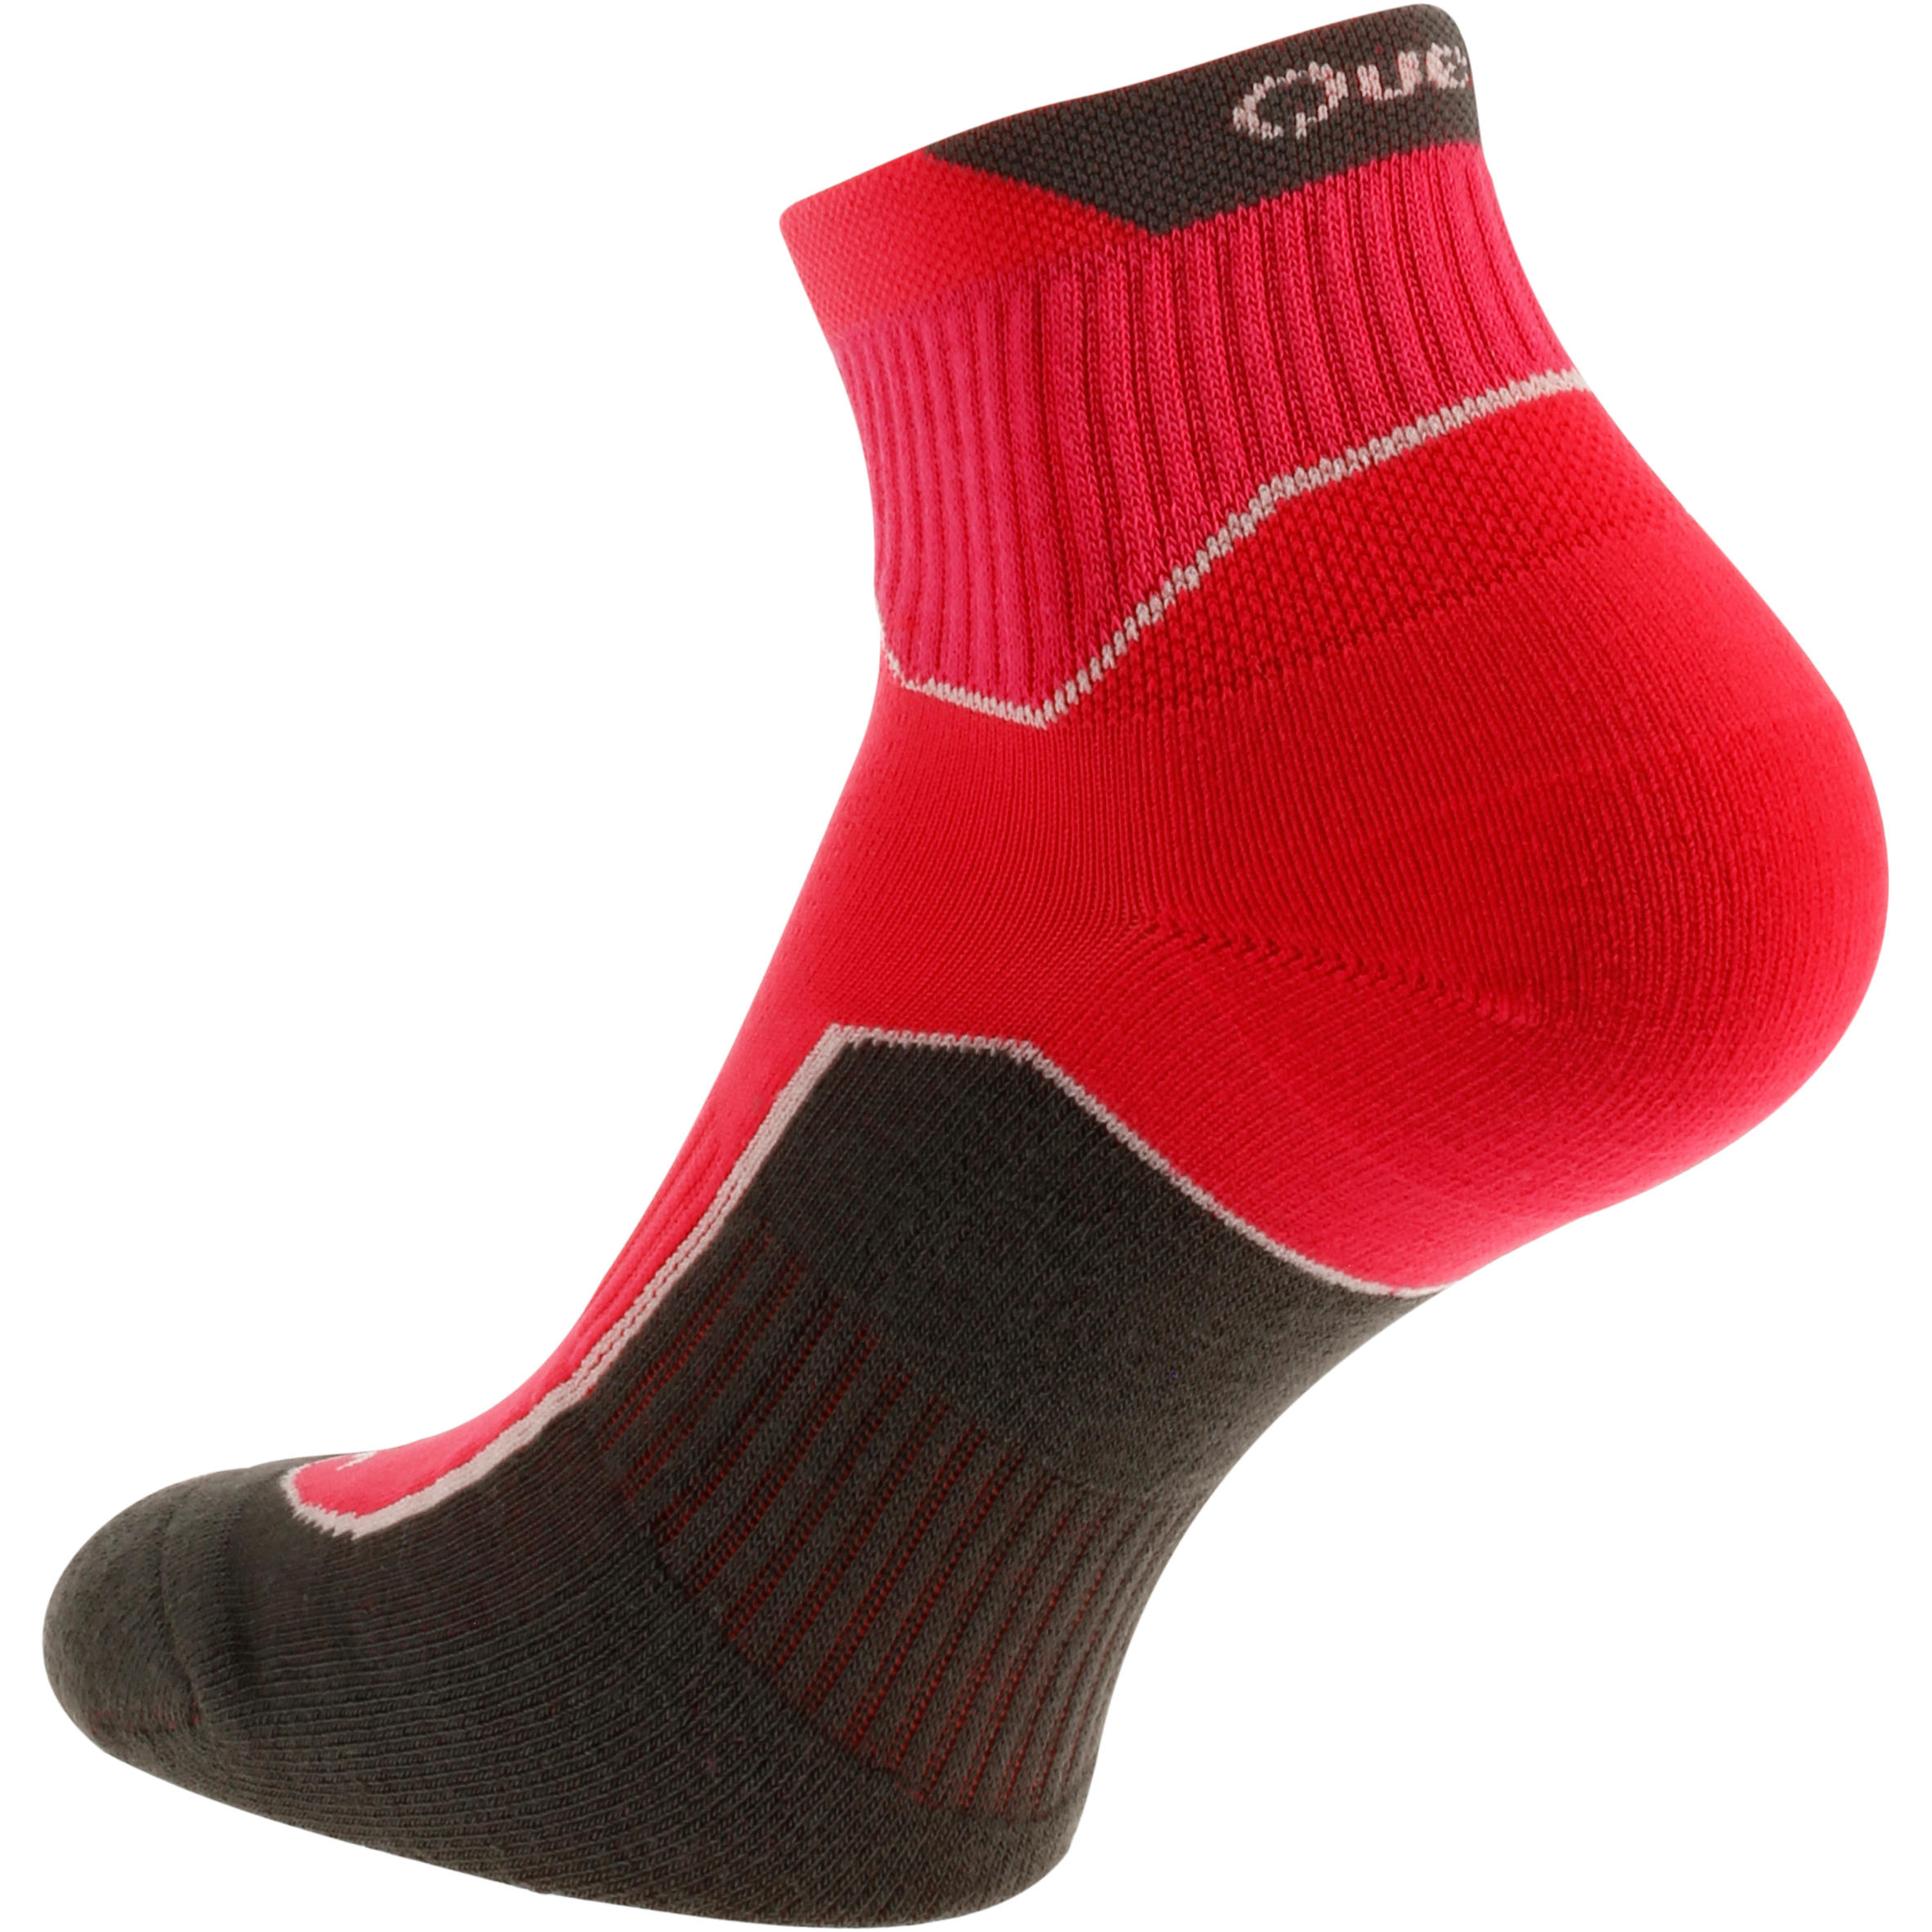 2 pairs of adult’s short Arpenaz 100 hiking socks in pink. 4/8